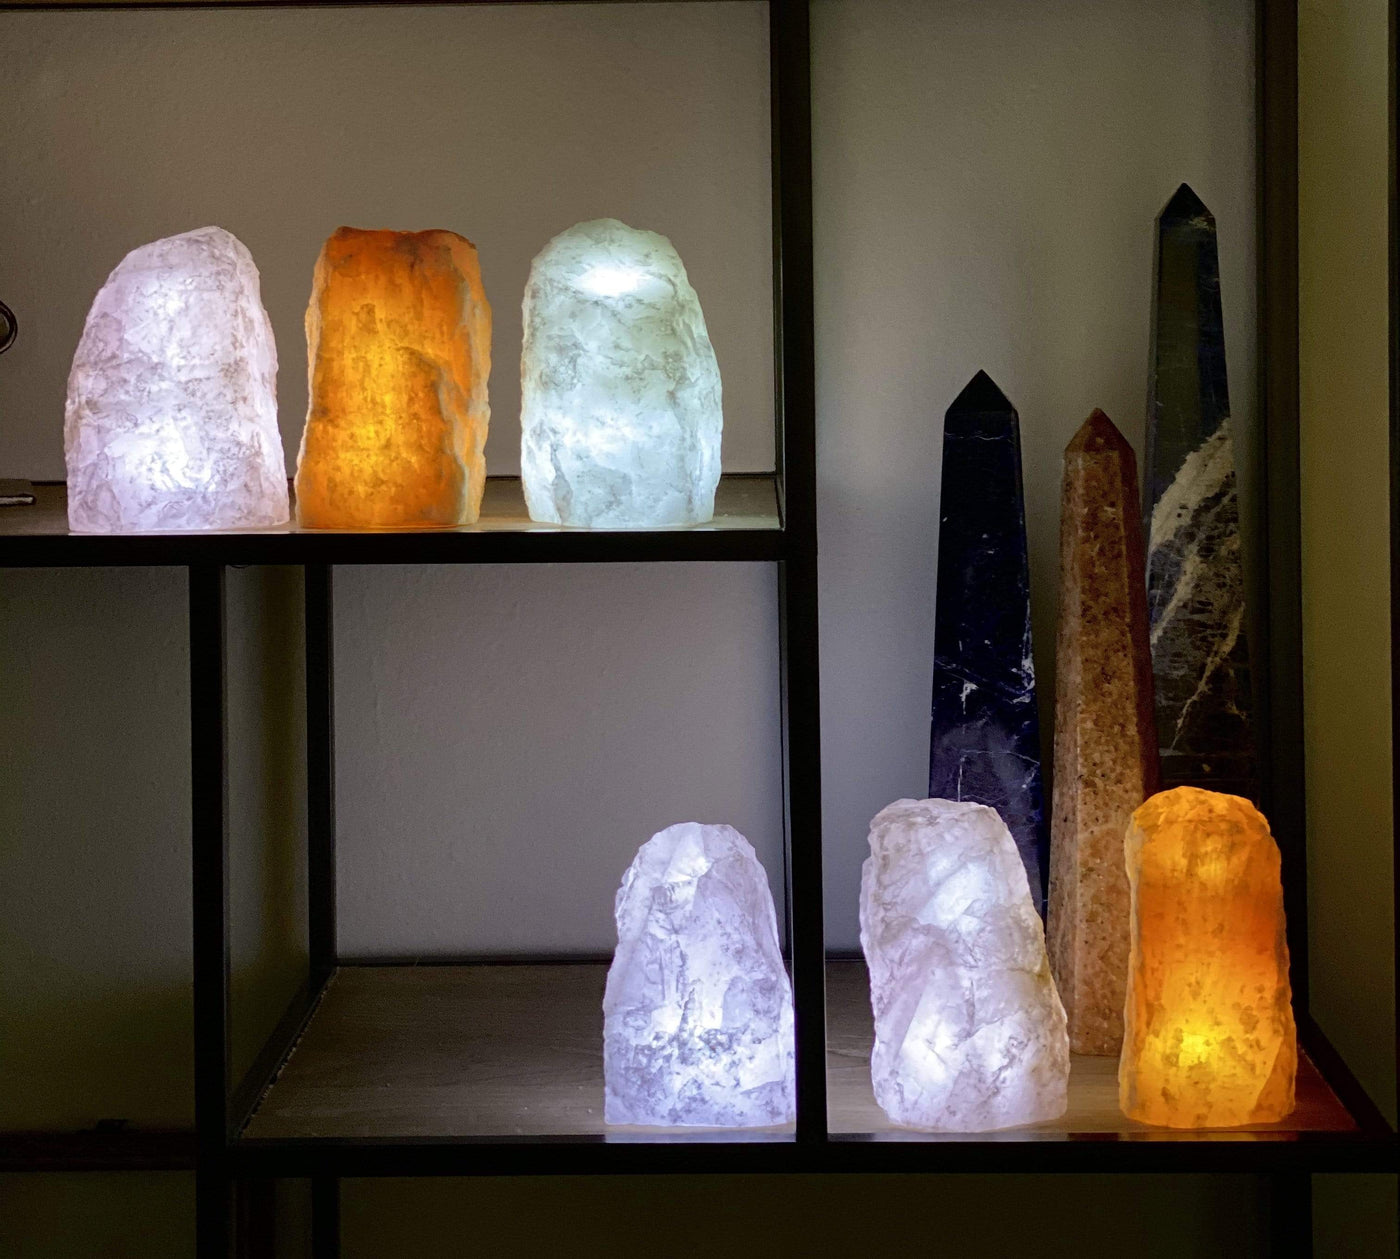 6 Rough Stone Lamps lit up in a dark room on a shelf with other crystals